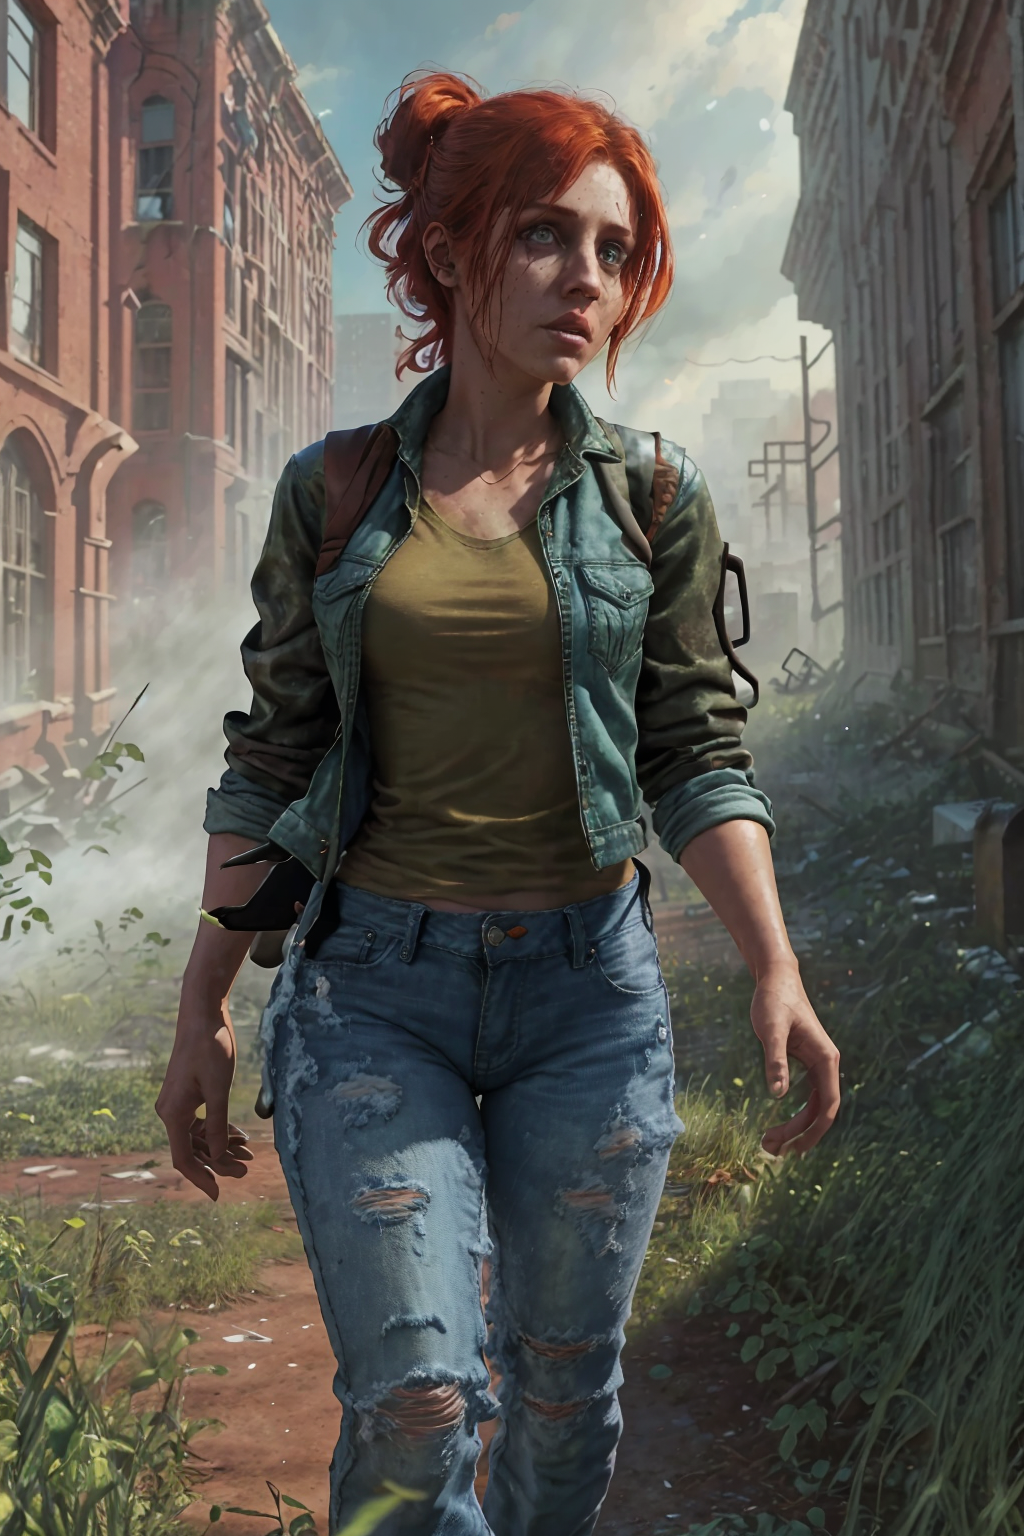 zrpgstyle post-apocalypse fallout 4 RPG character painting running zombie horde ginger hair upsweep updo thin woman wearin...